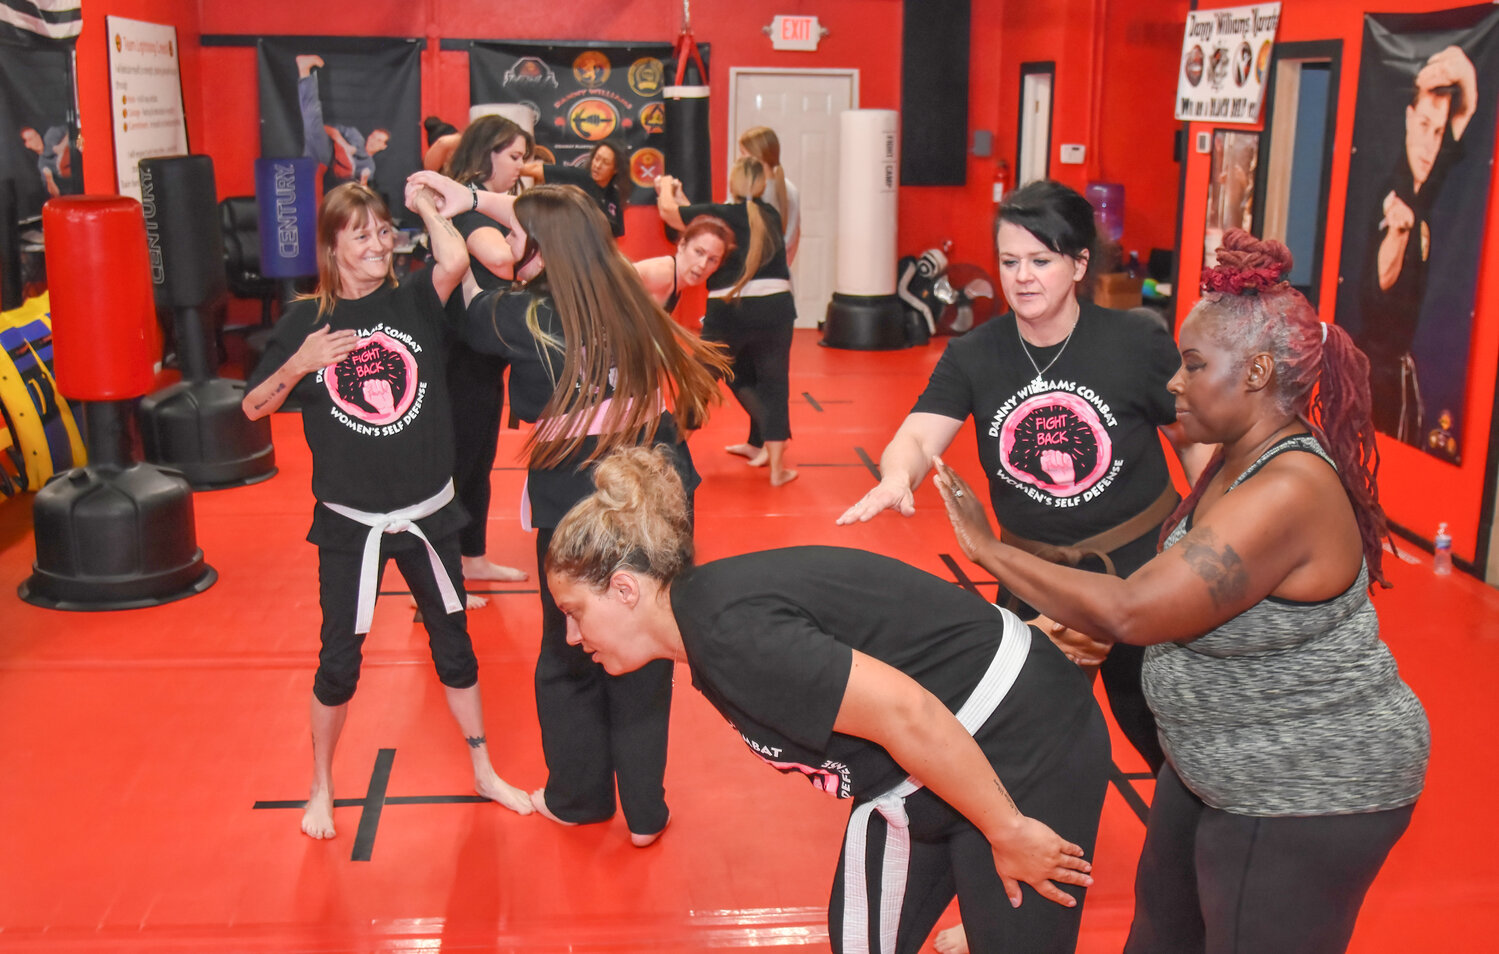 Glenda Williams, second from right, instructs two participants in a Wednesday night women’s self-defense class. Glenda and her husband Danny own and operate the Danny Williams Combat Martial Arts Program on West Pearl Street.